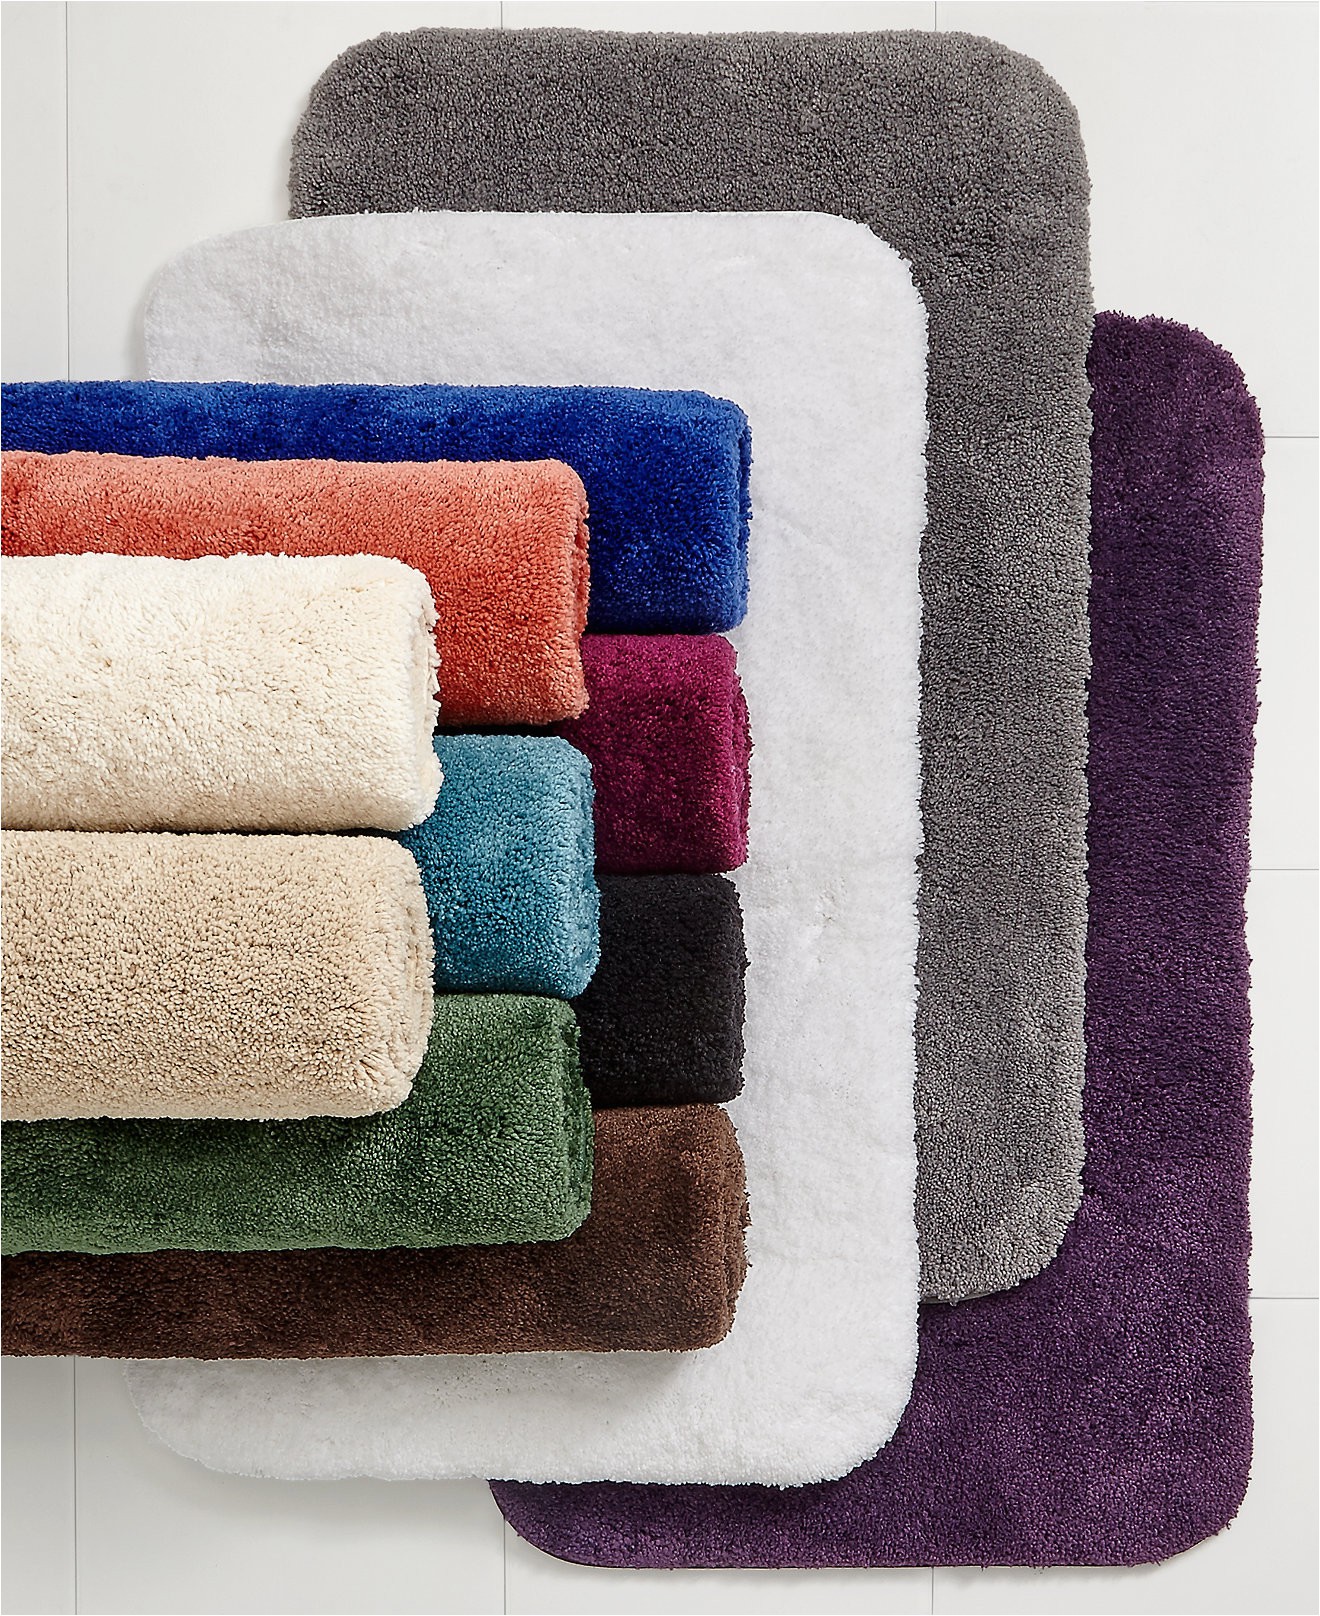 Green Bath Rugs Jcpenney Jcpenney Bathroom Rugs and towels Image Of Bathroom and Closet